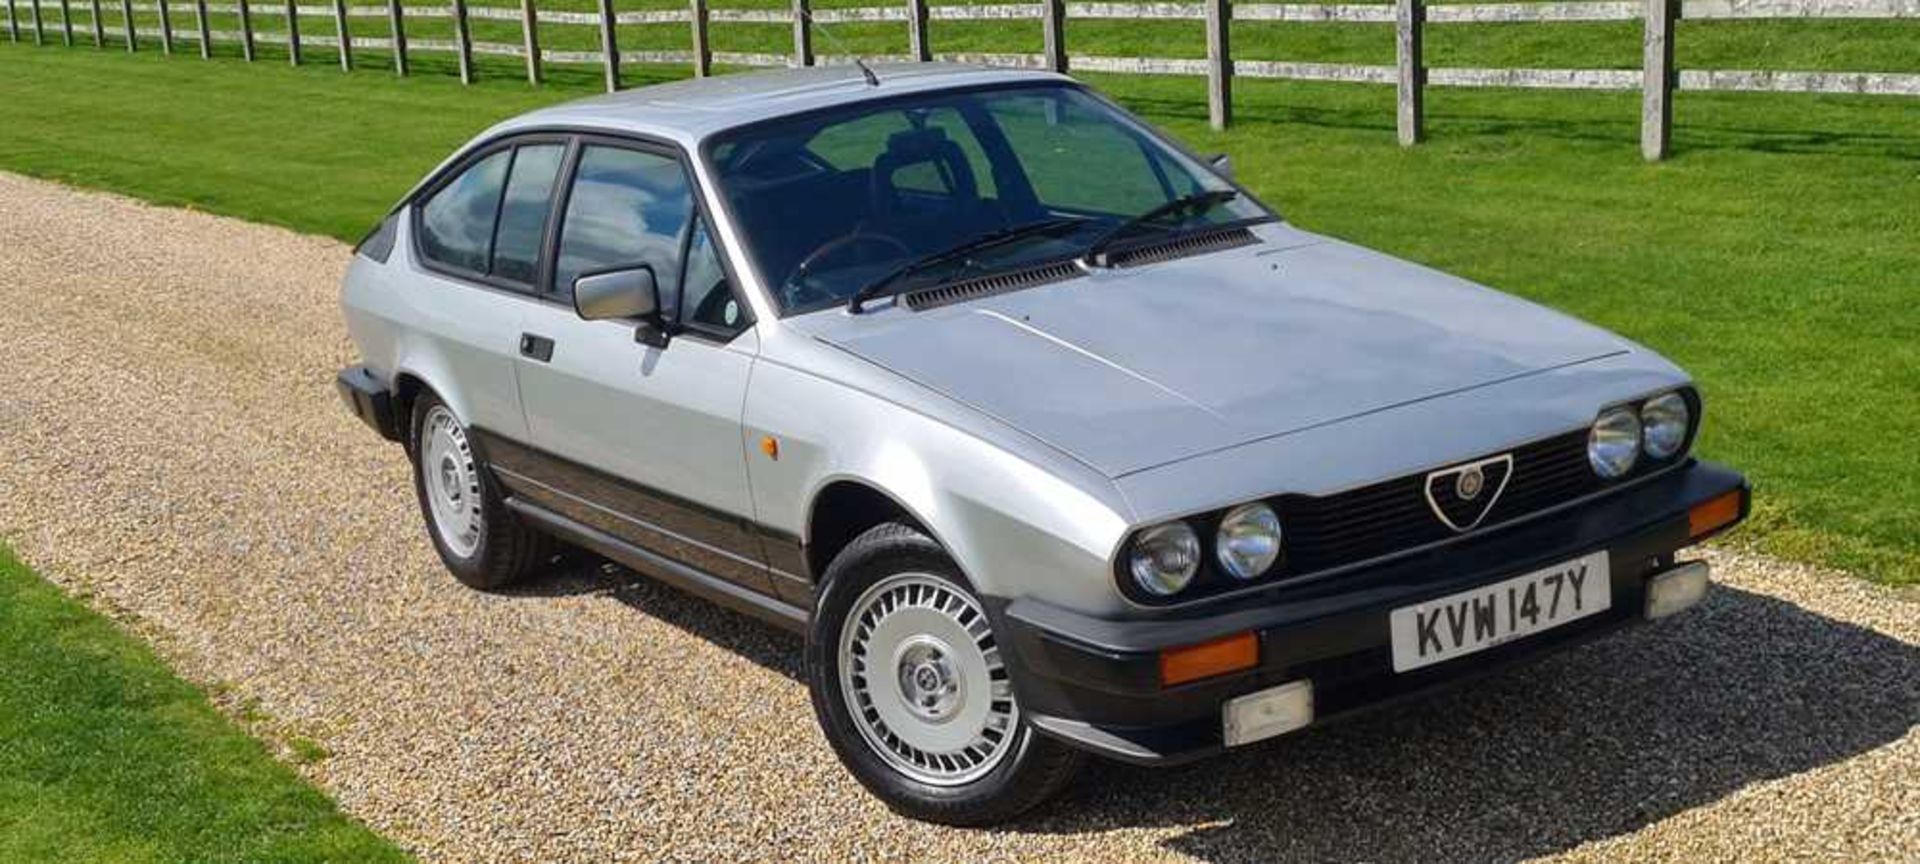 1983 Alfa Romeo GTV 2.0 litre Single family ownership and 48,000 miles from new - Image 10 of 51